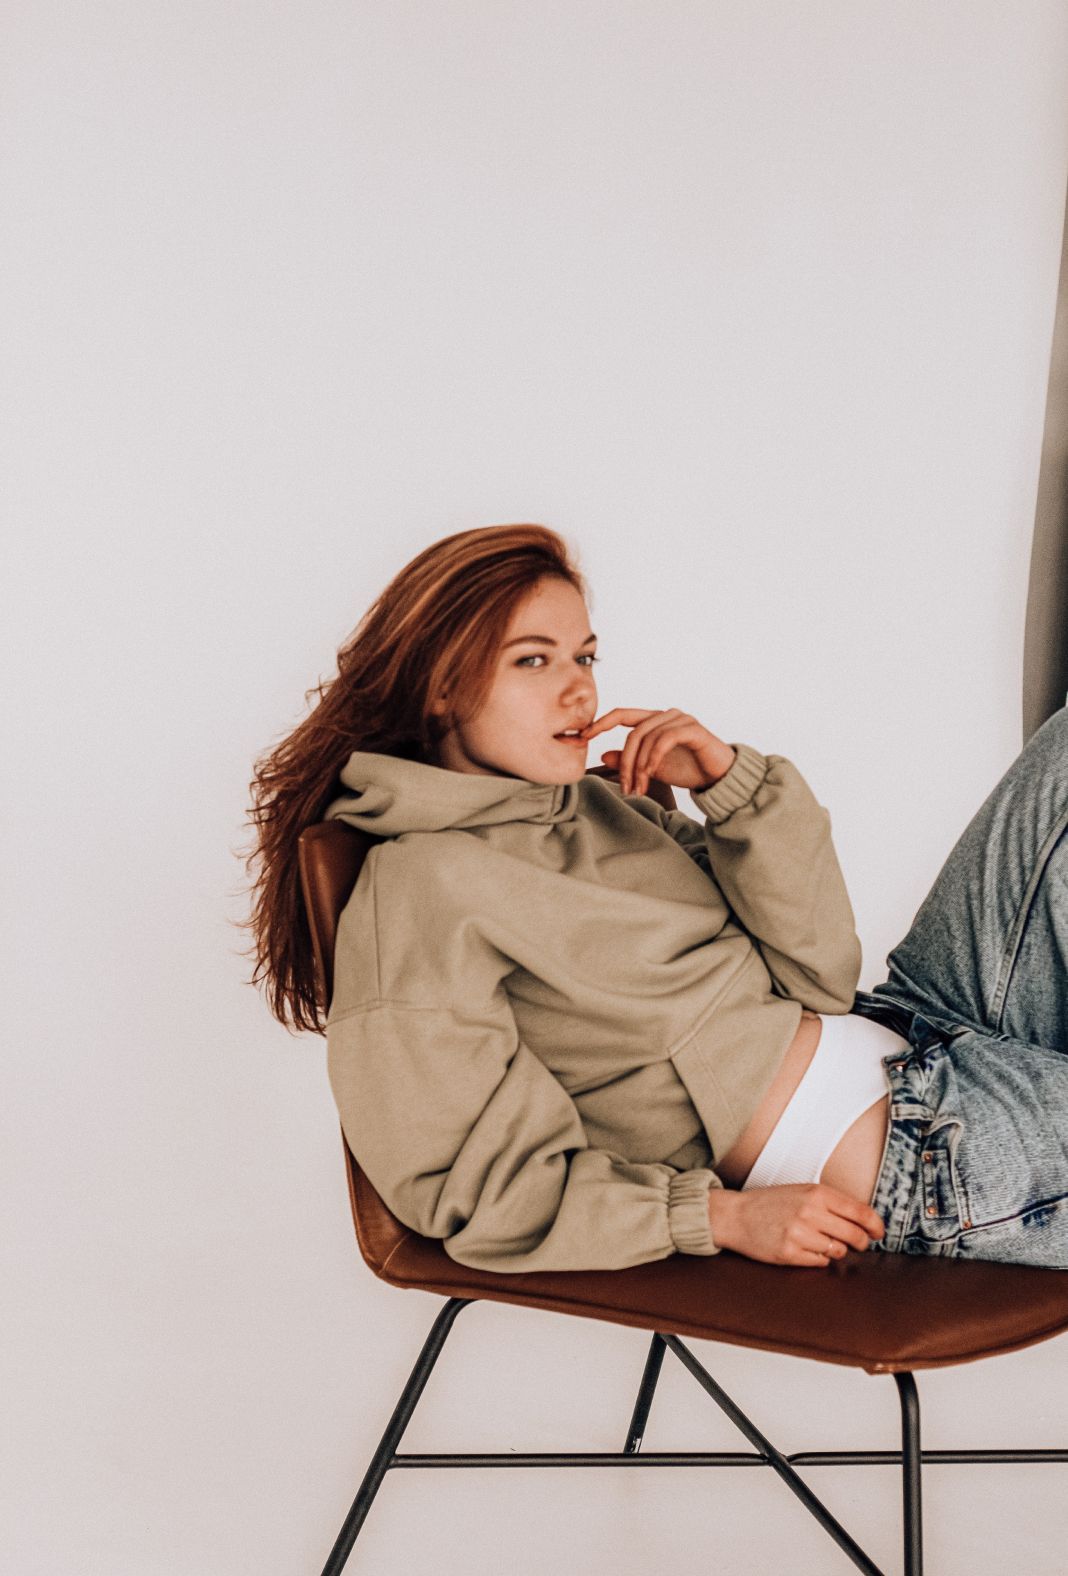 A woman is sitting on a chair wearing a hoodie and jeans.